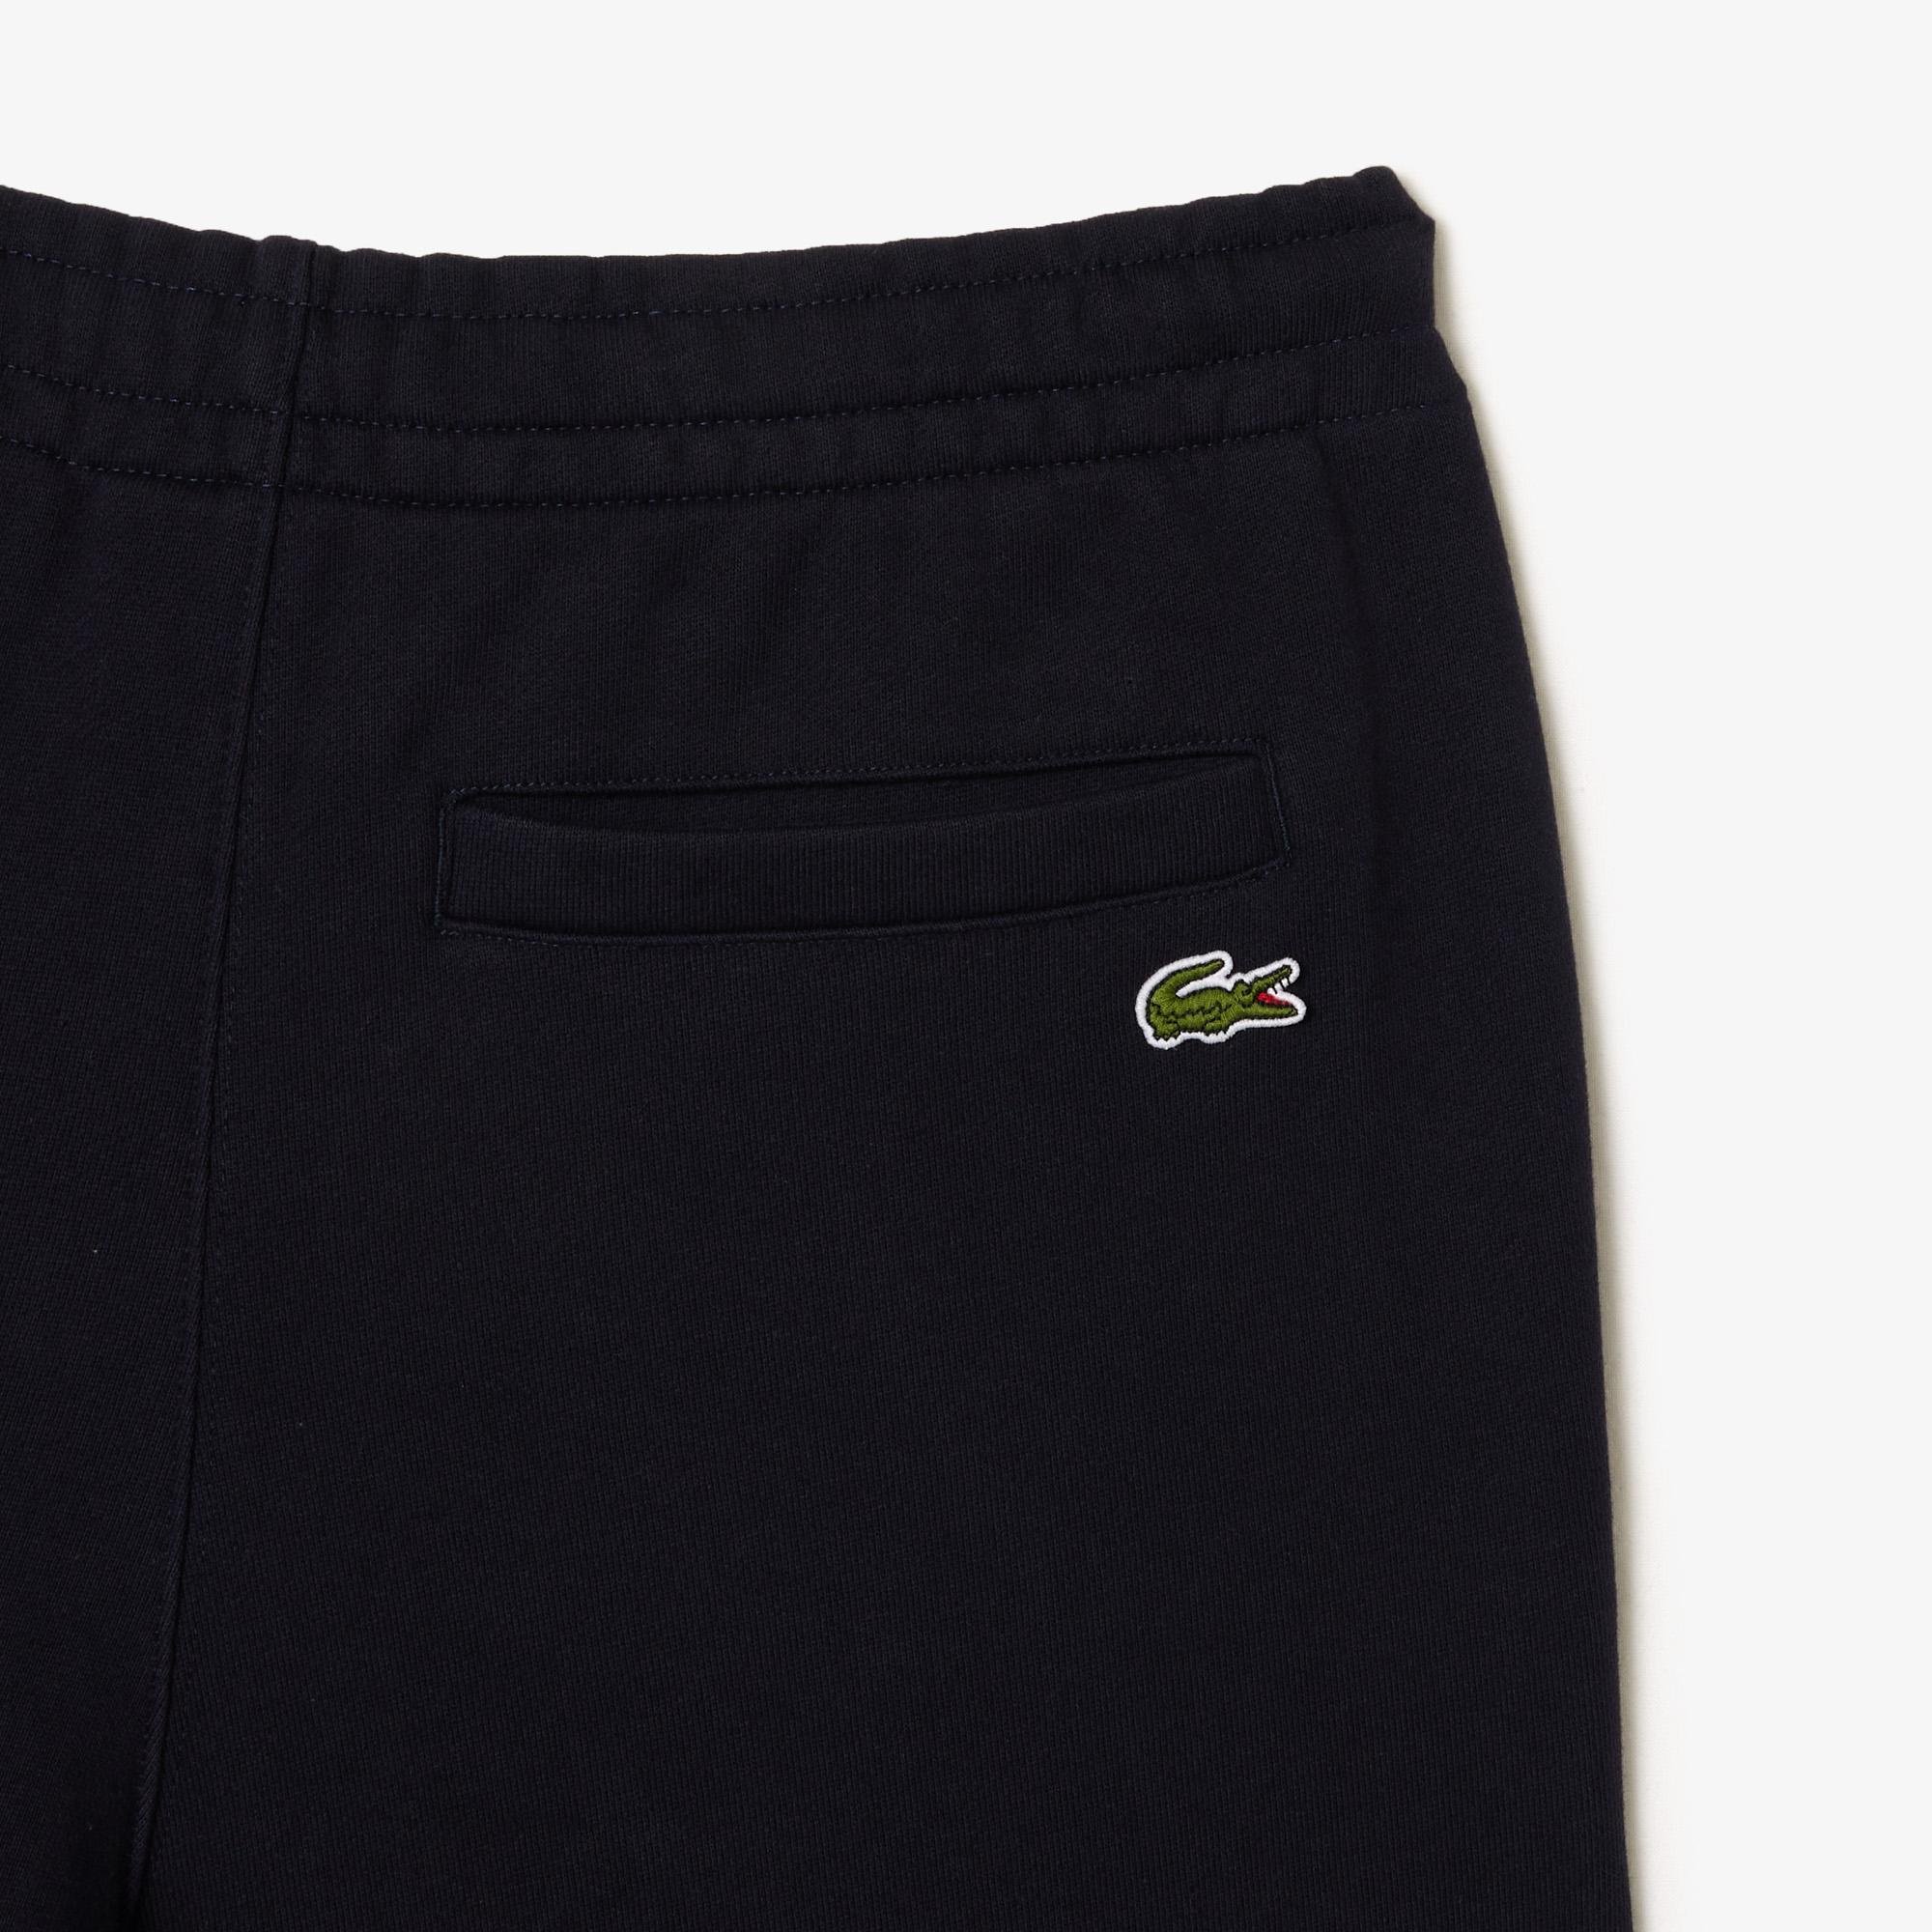 Lacoste Iconic Print Track Pants